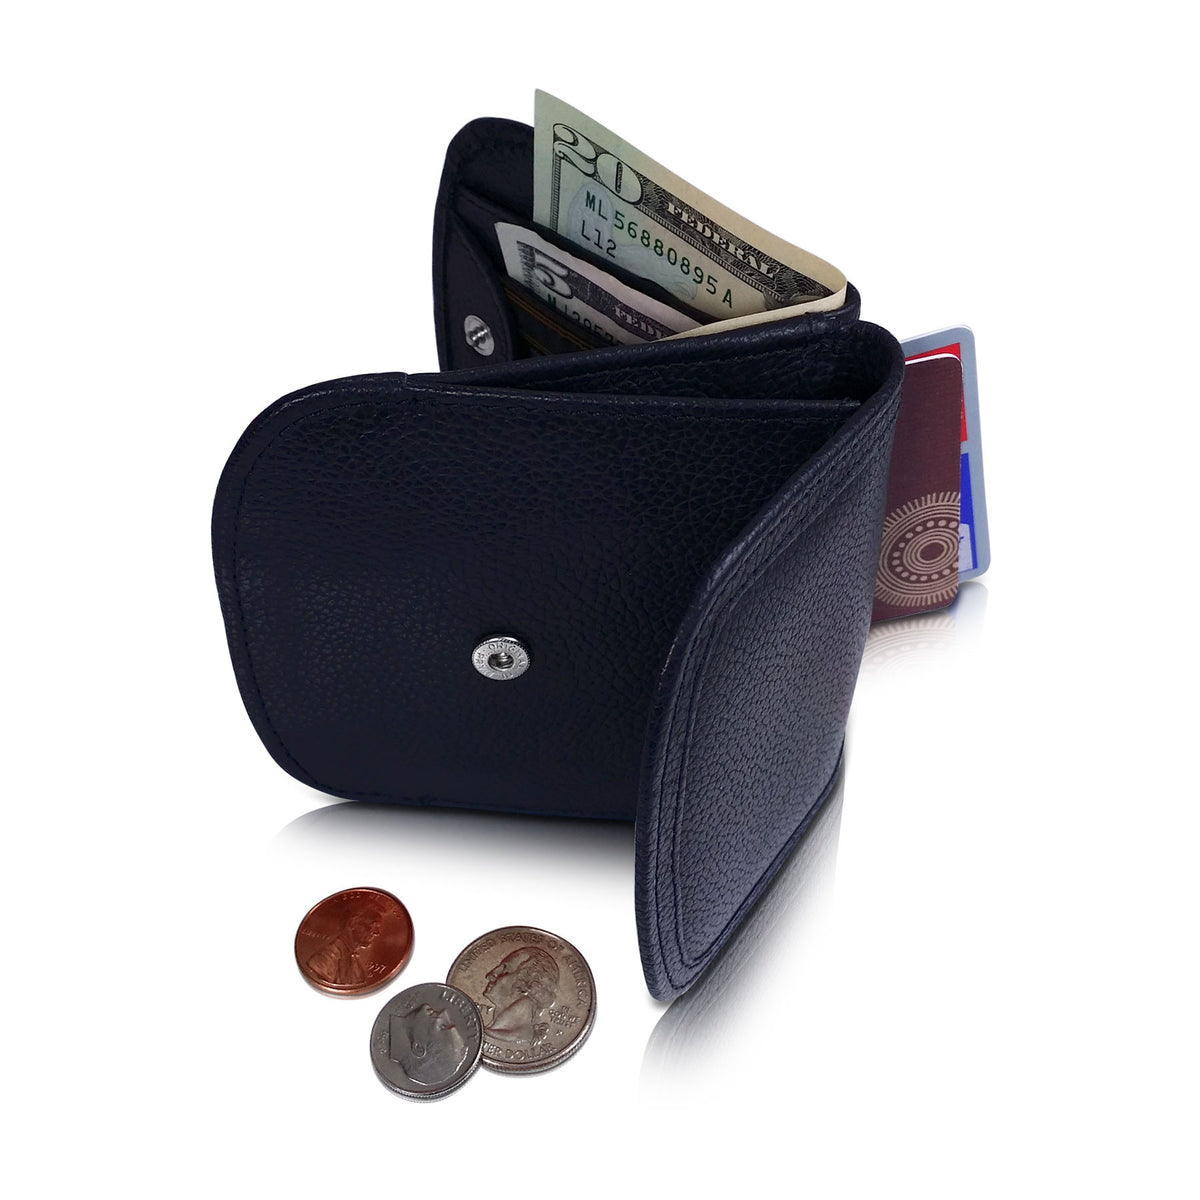 Taxi Wallet. Blue Leather Folding Wallet- Coins, Cards and Bills. – Alicia  Klein - Taxi Wallet - OWLrecycled